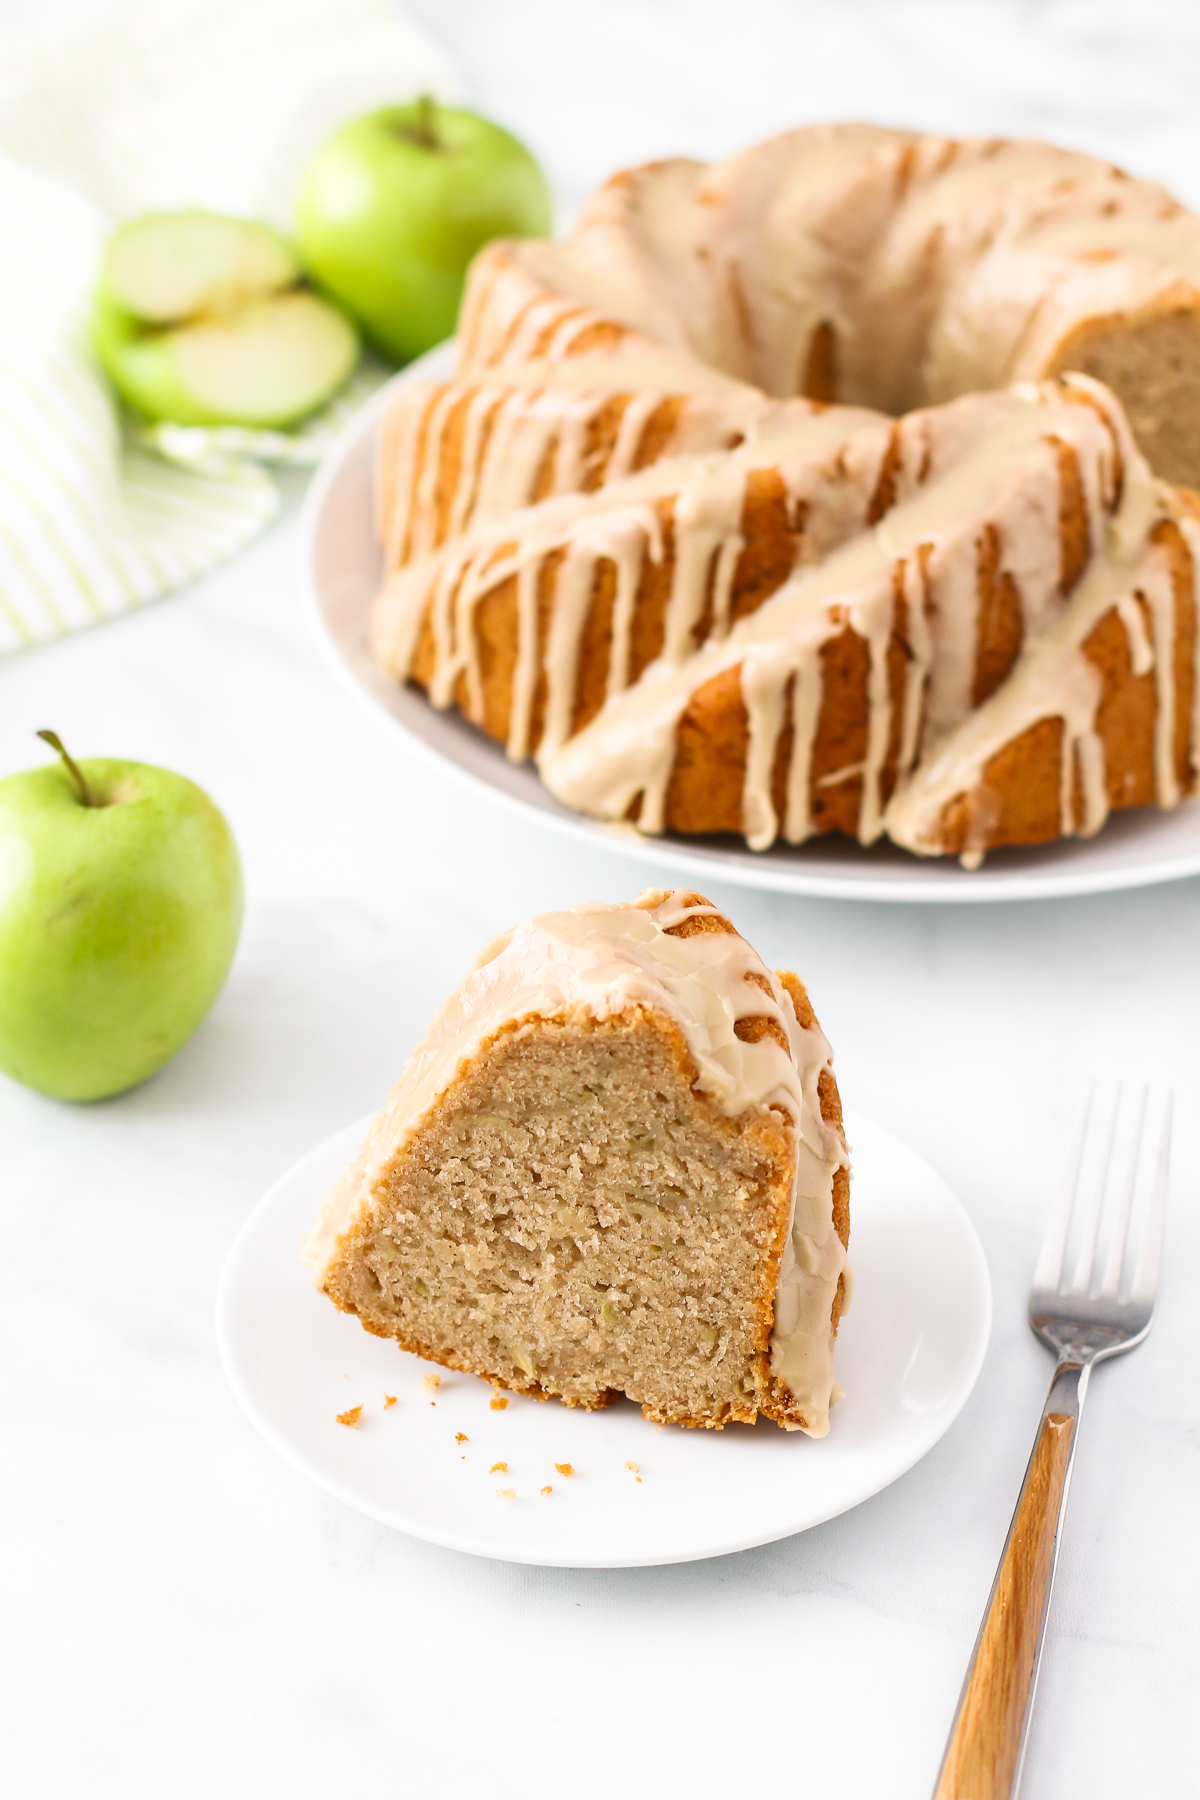 Gluten Free Vegan Caramel Apple Bundt Cake. As the decadent caramel glaze is dripping down the sides of this gluten free vegan caramel apple bundt cake, you can’t help but want a slice.